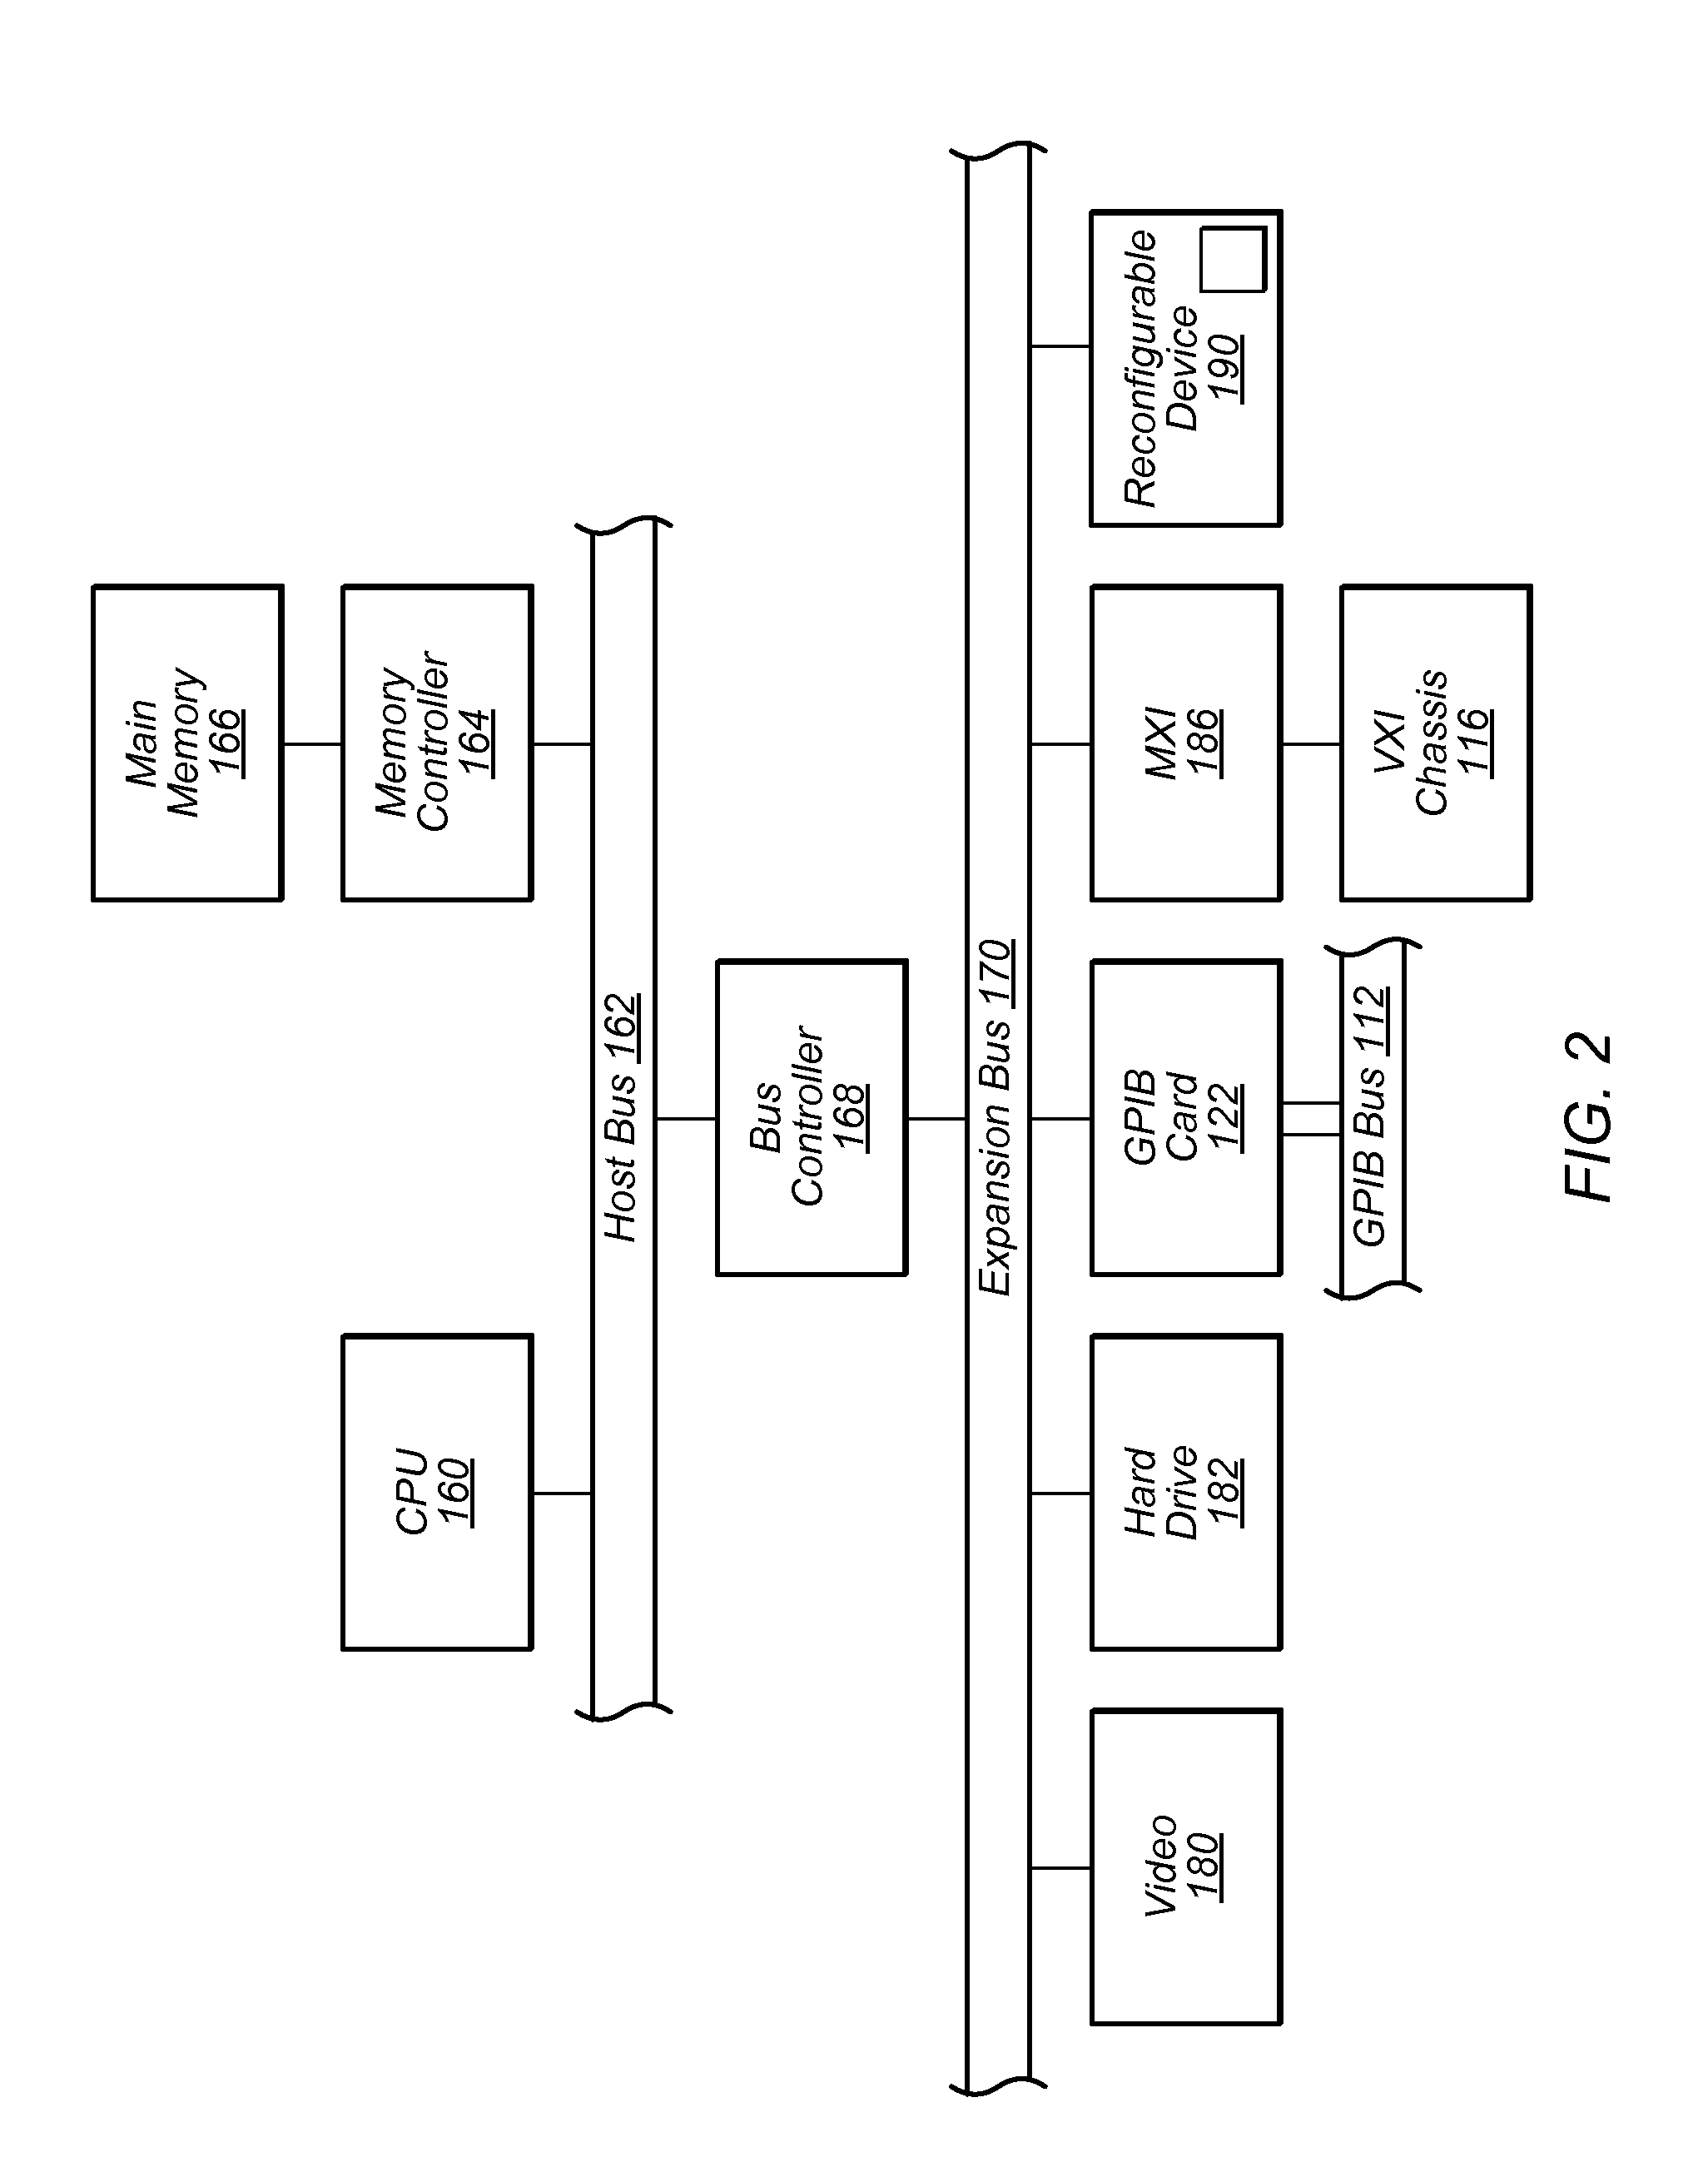 Displaying Physical Signal Routing in a Diagram of a System